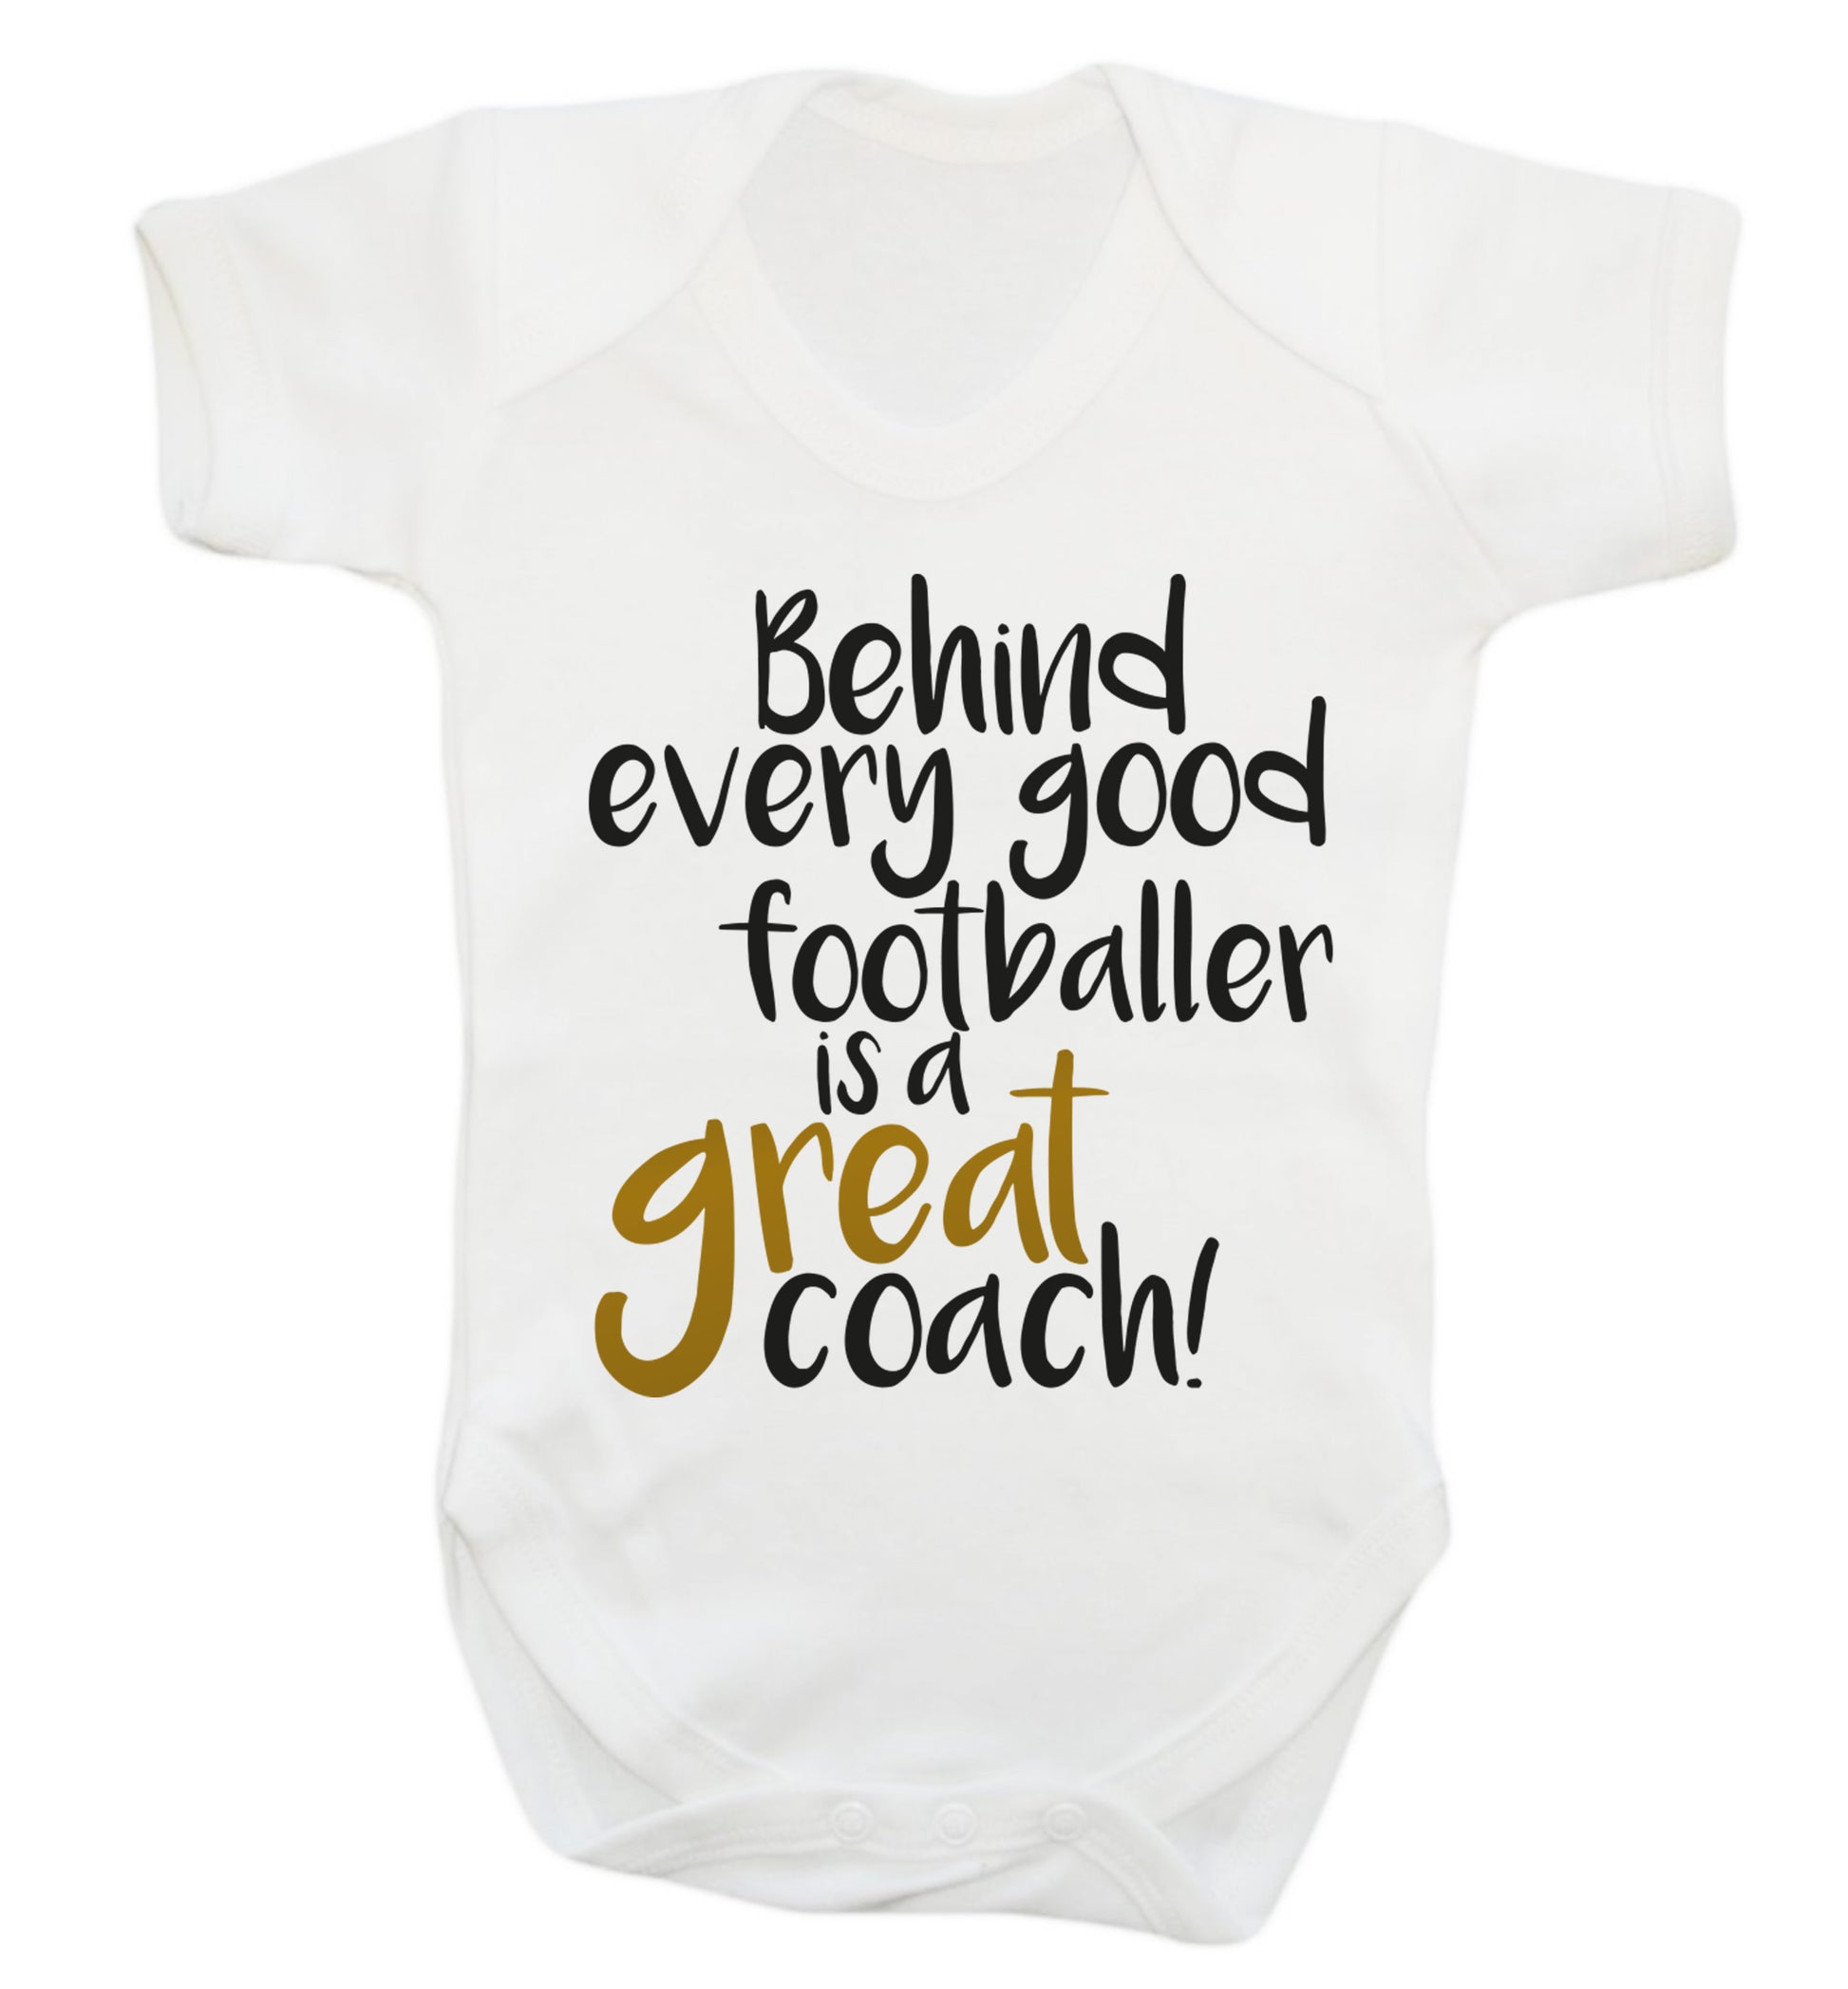 Behind every good footballer is a great coach! Baby Vest white 18-24 months